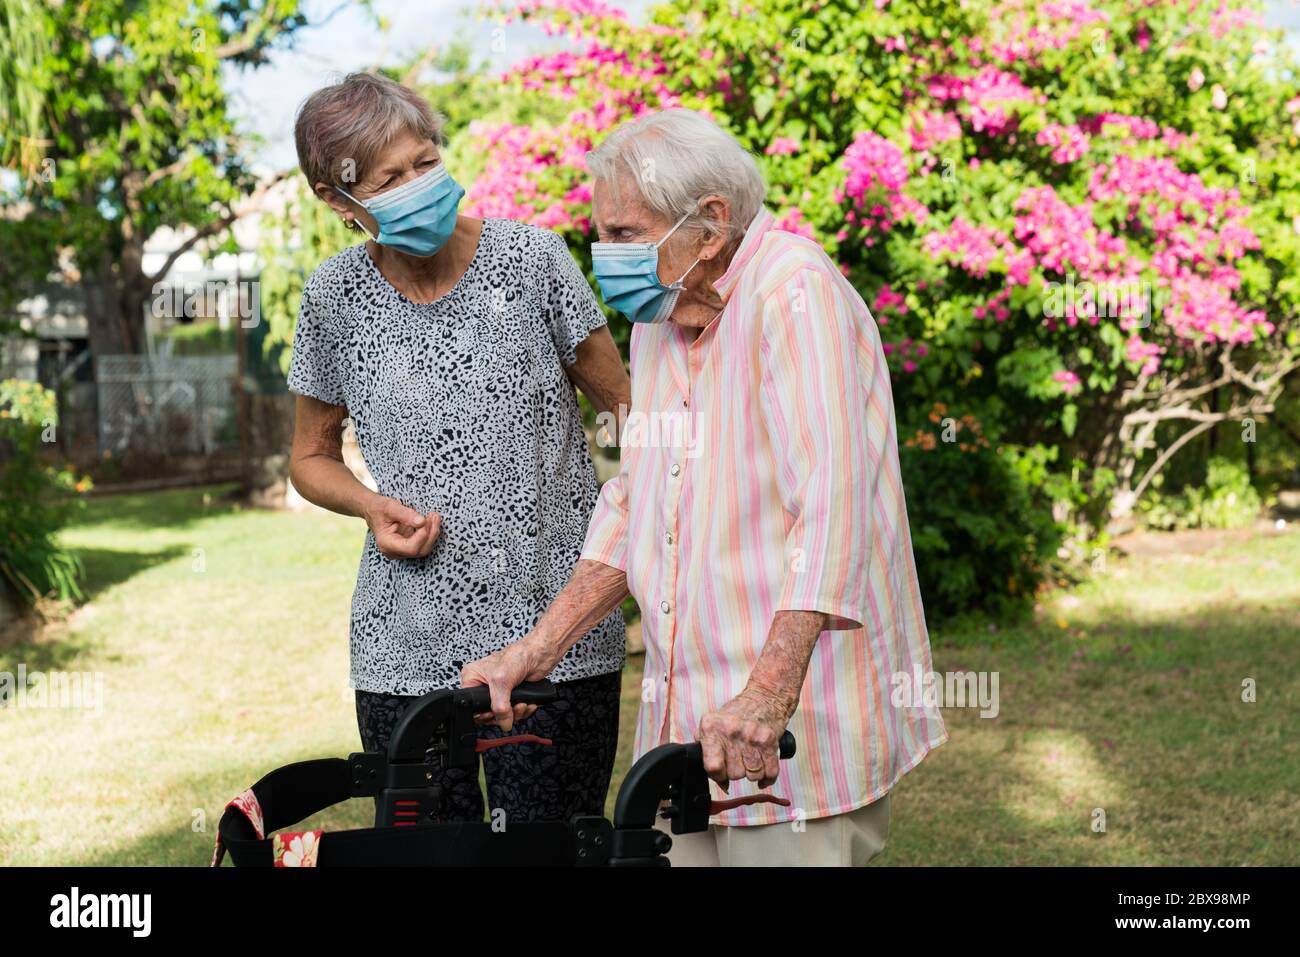 Carer helping elderly lady to get exercise in garden wearing mask Stock Photo